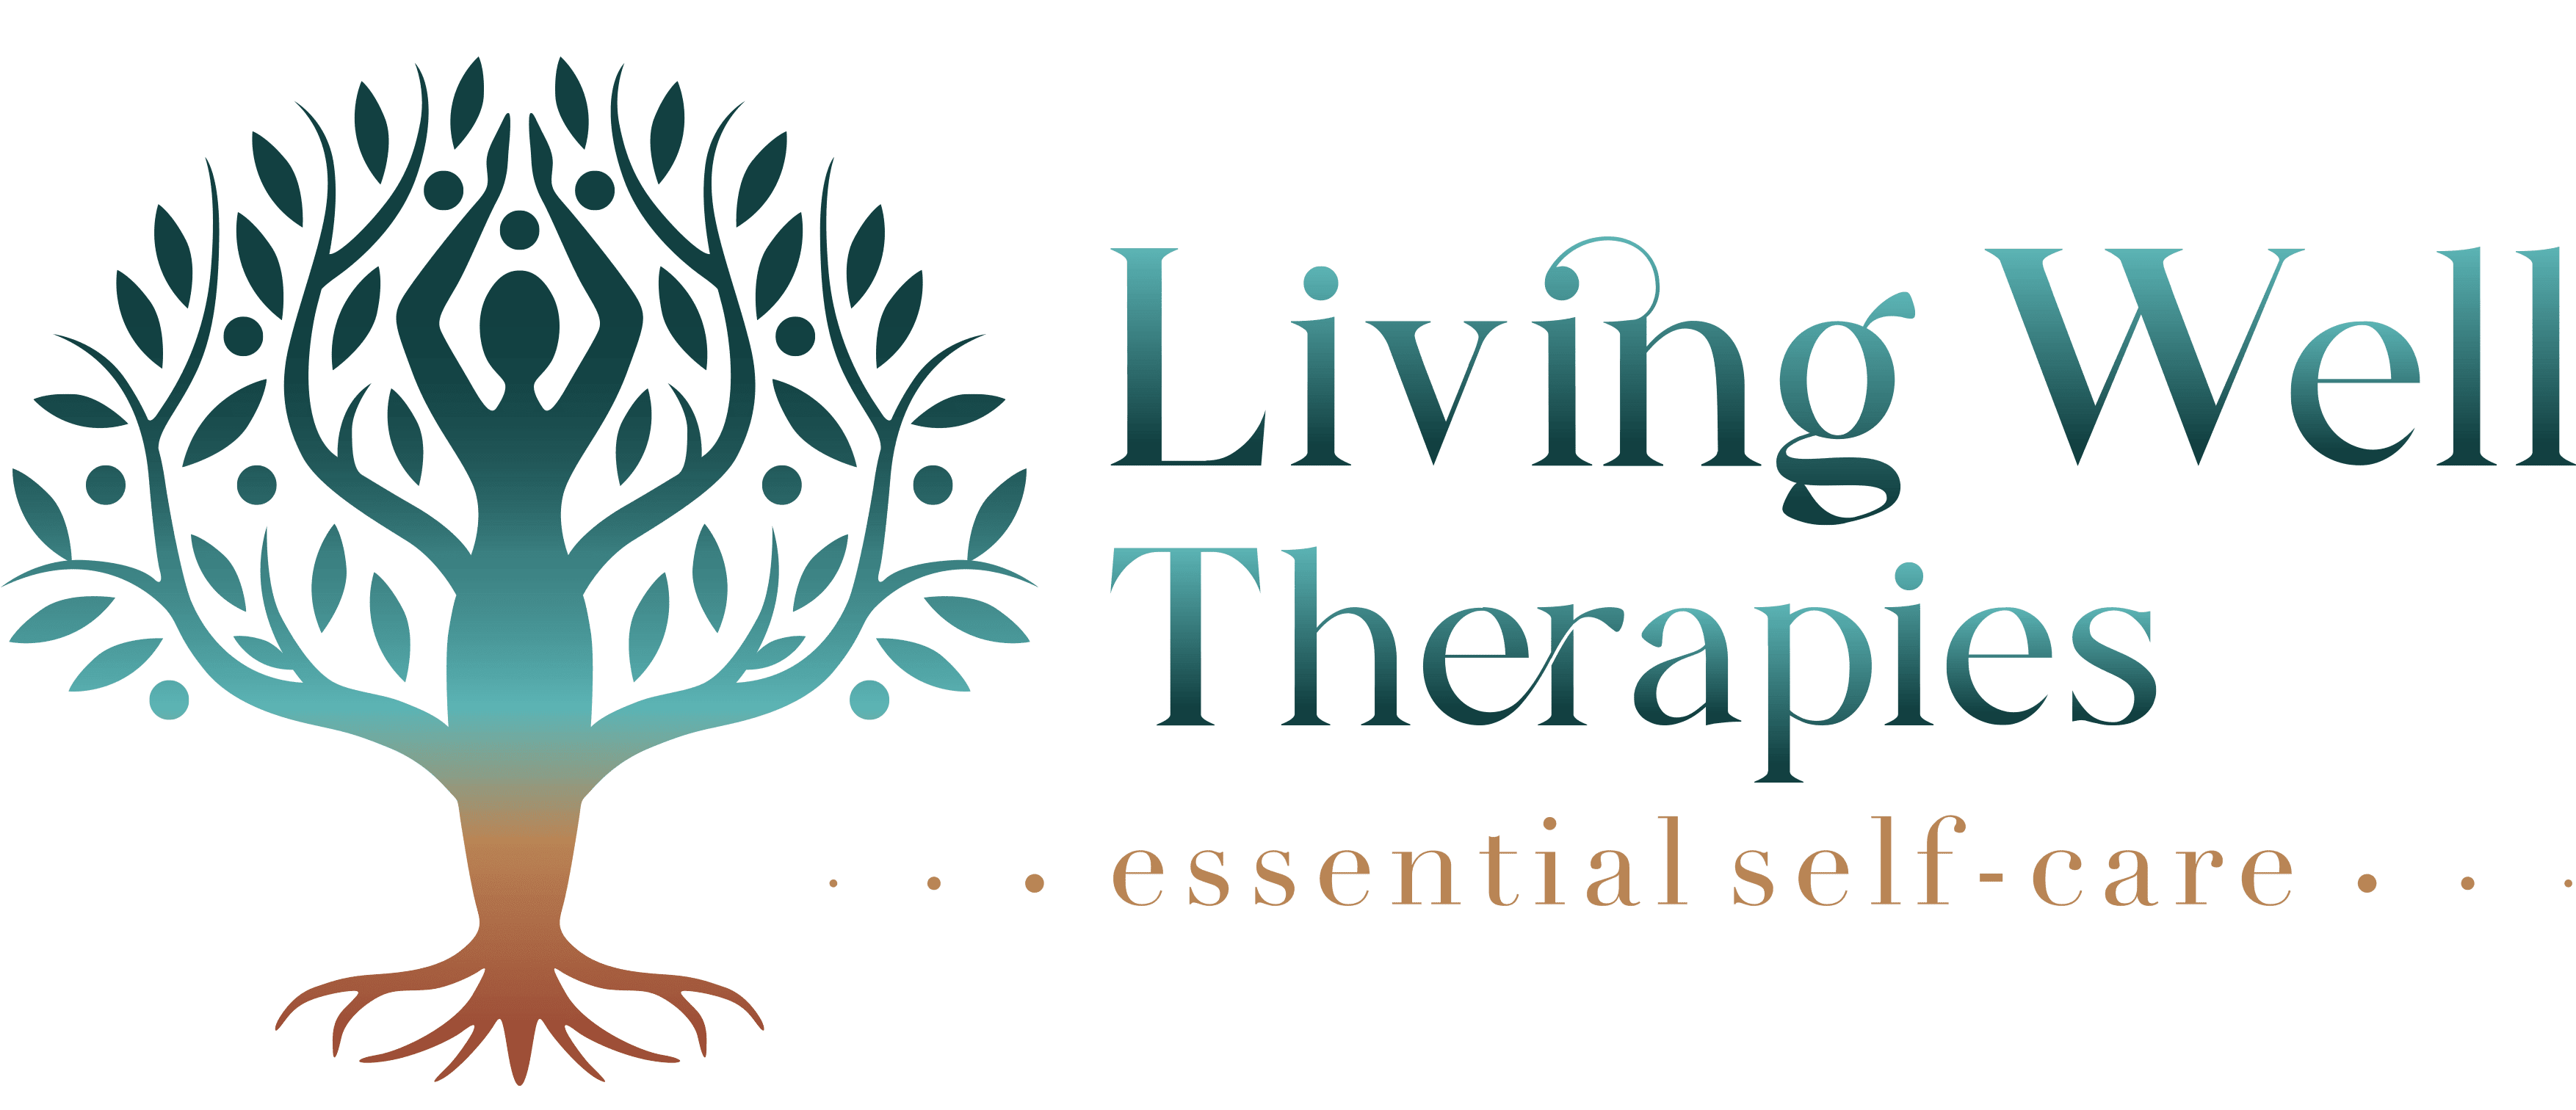 Living Well Therapies